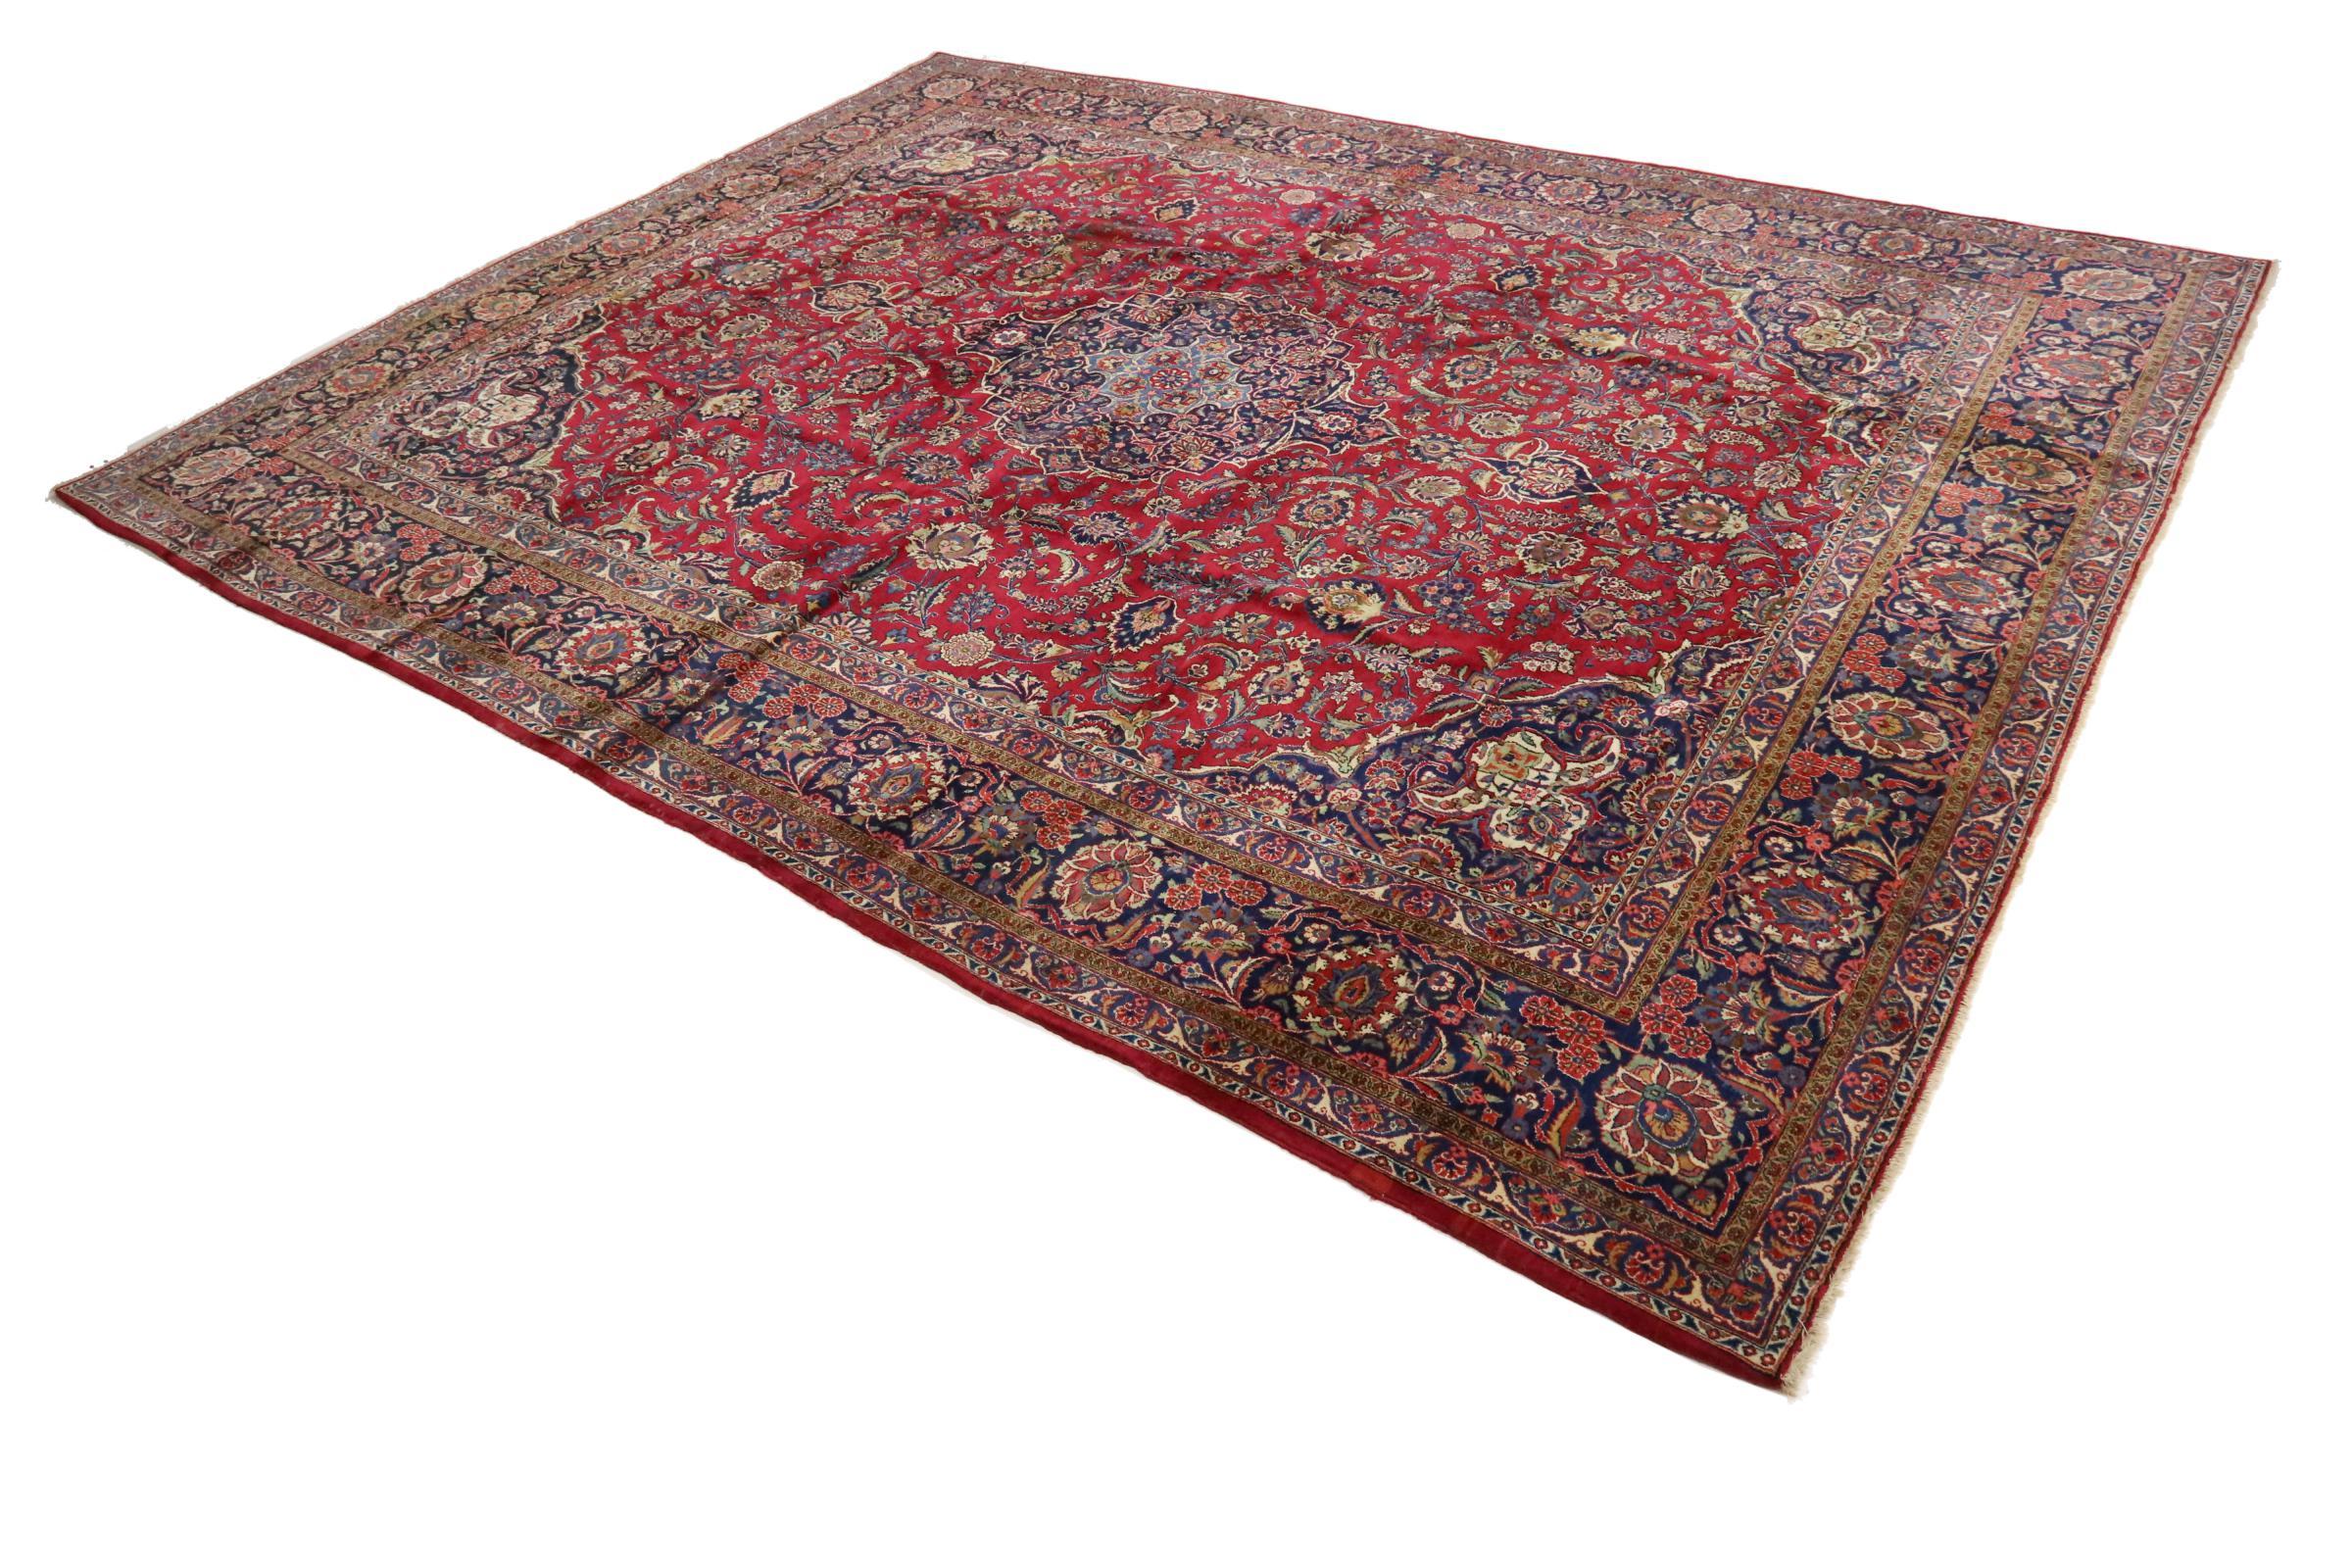 A stunning Persian rug, Keshan antique. 

Thickness: Approximate 8 mm
Pile: Handspun wool
Age: Antique, over 80 years
Weight: Approximate 47.00 kg
Size: 412 x 323 cm
Knot density: 320 000 - 360 000 / m² 
Warp: Cotton
Condition/Maintenance: